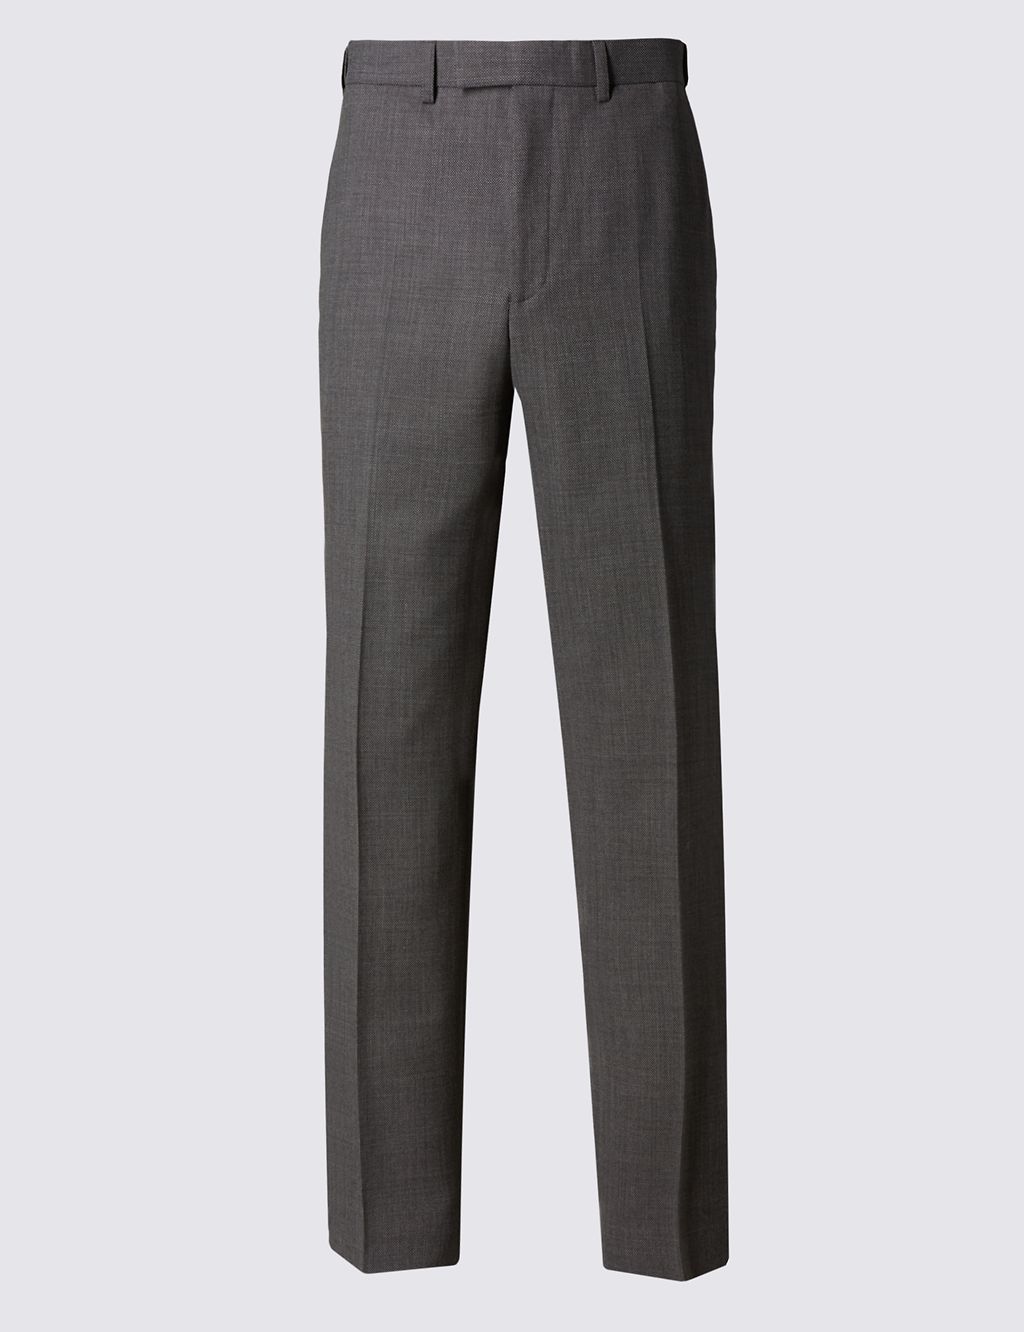 Grey Regular Fit Suit Trousers 1 of 1